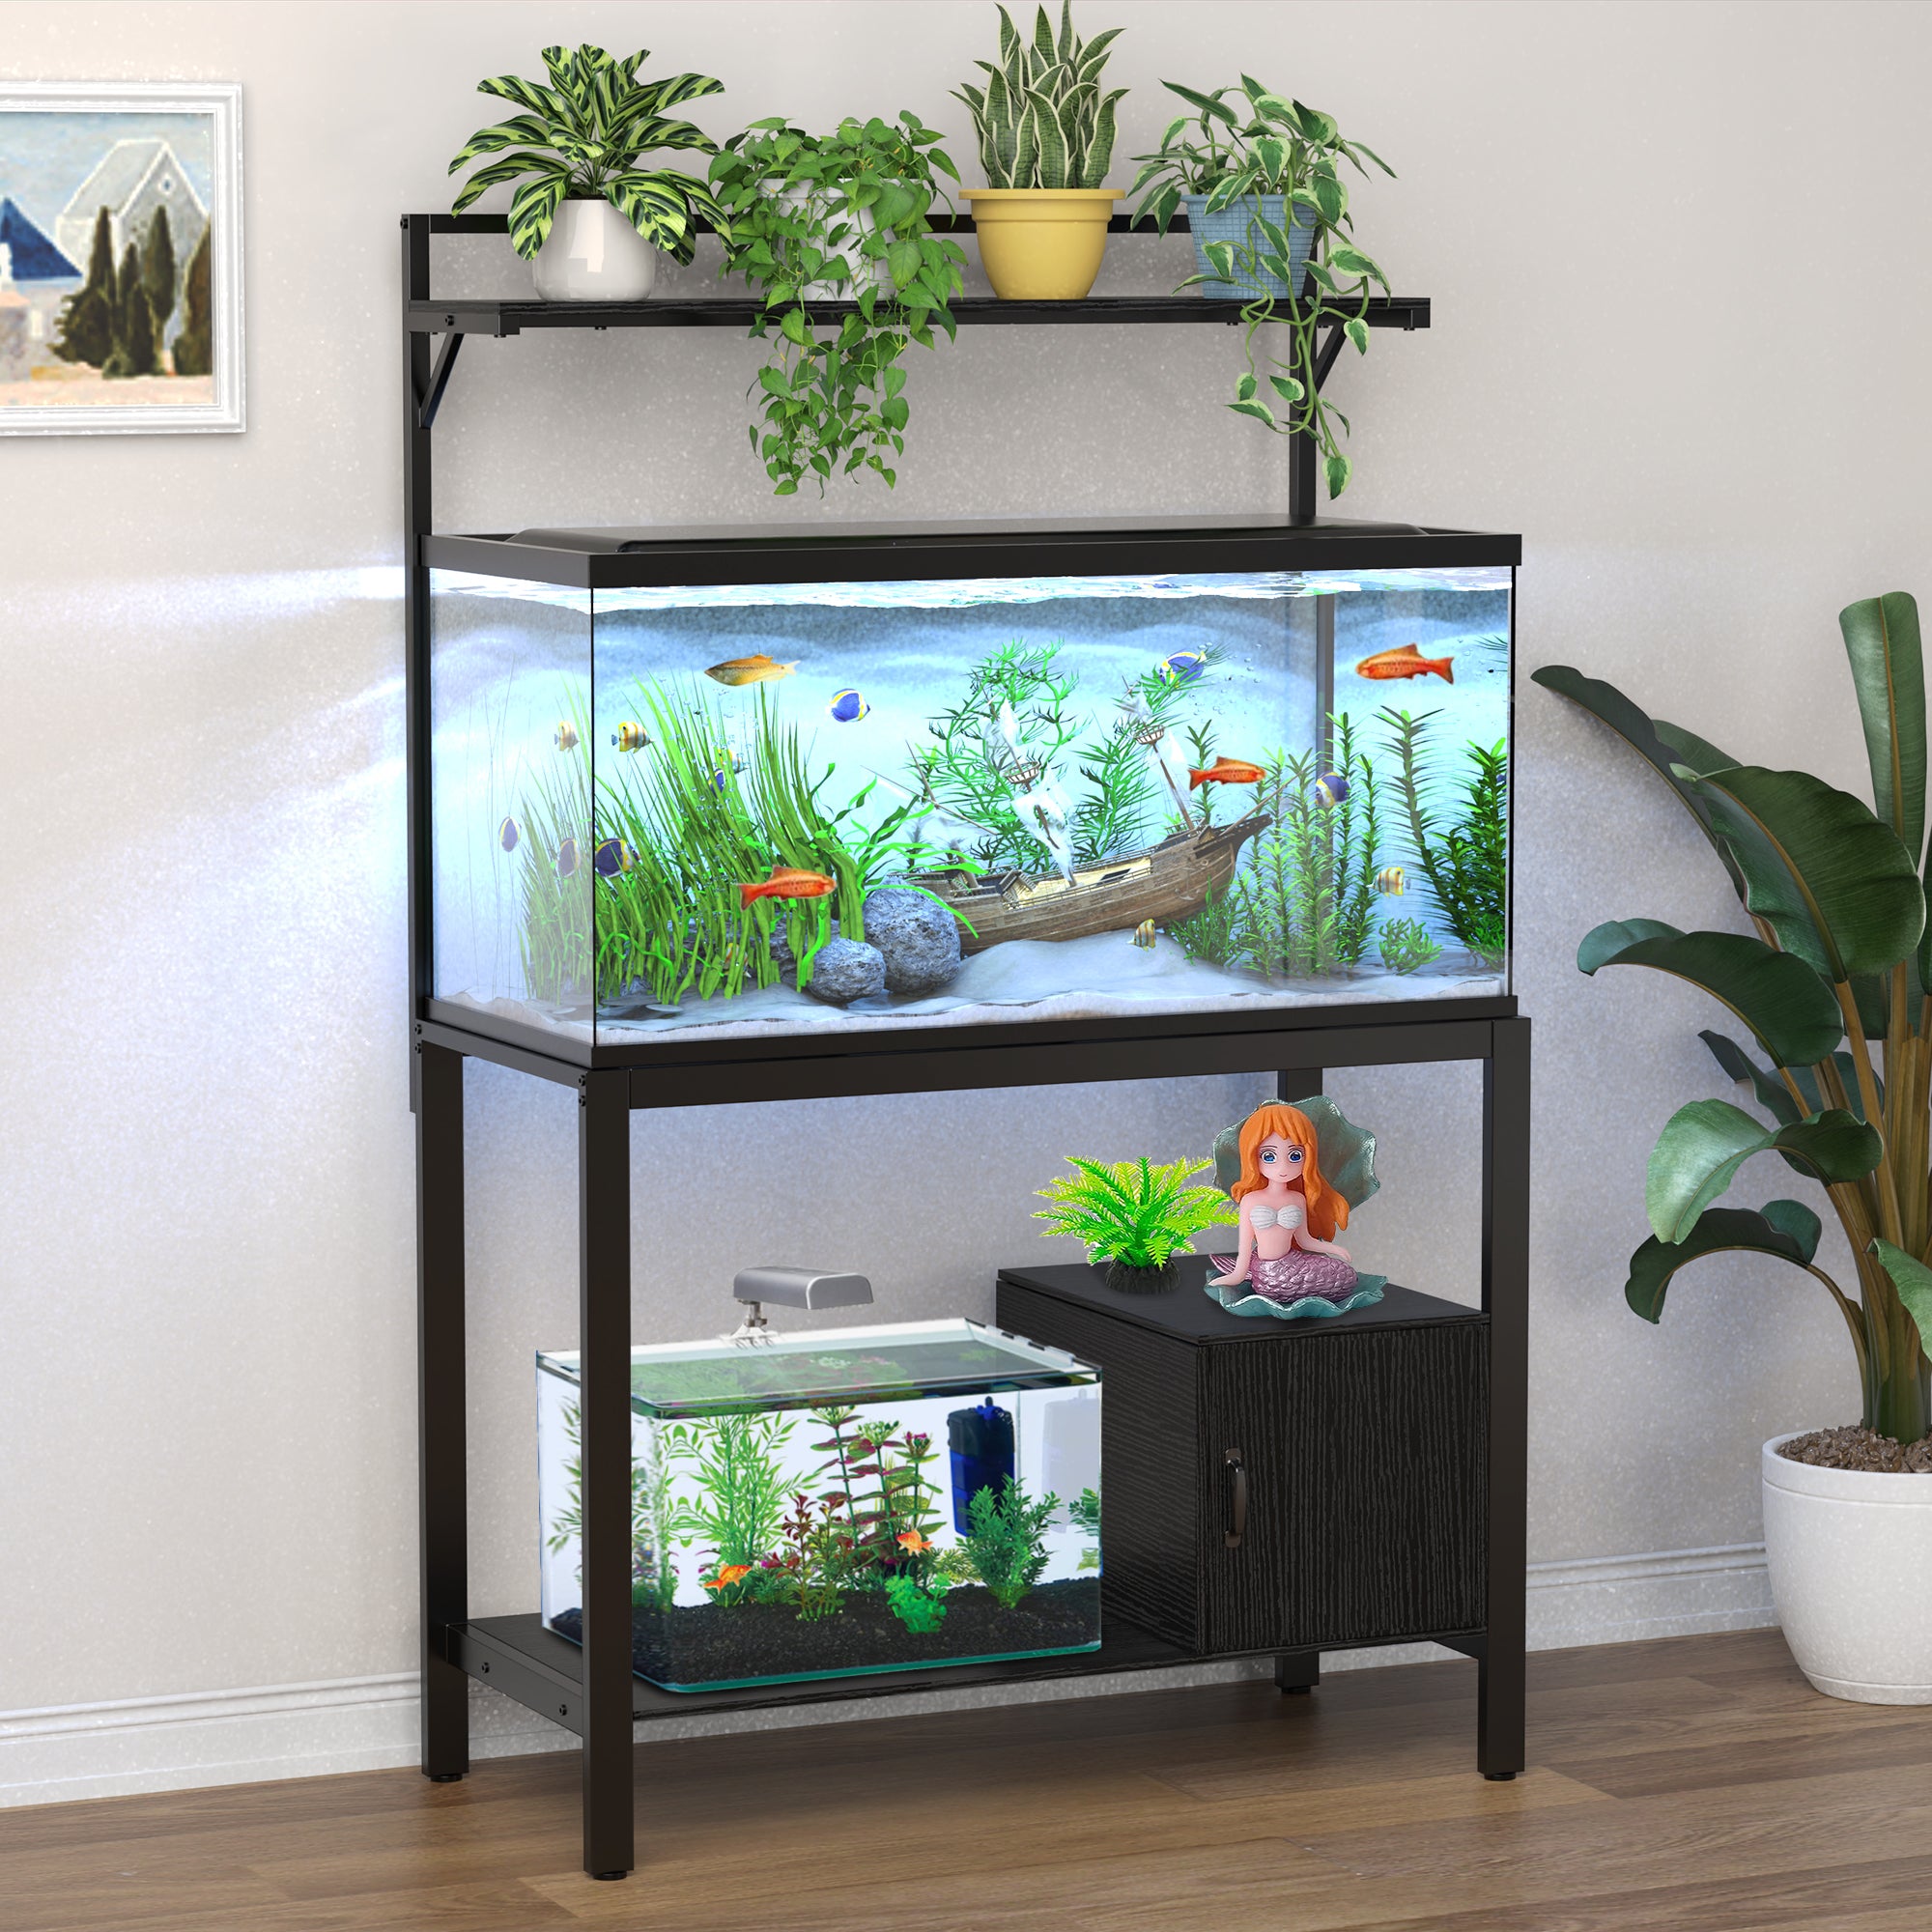 GDLF 40-50 Gallon Fish Tank Stand with Plant Shelf Metal Aquarium Stand with Cubby Storage 36.6 x 18.5 Tabletop Fits Aquarium,Turtle Tank,or